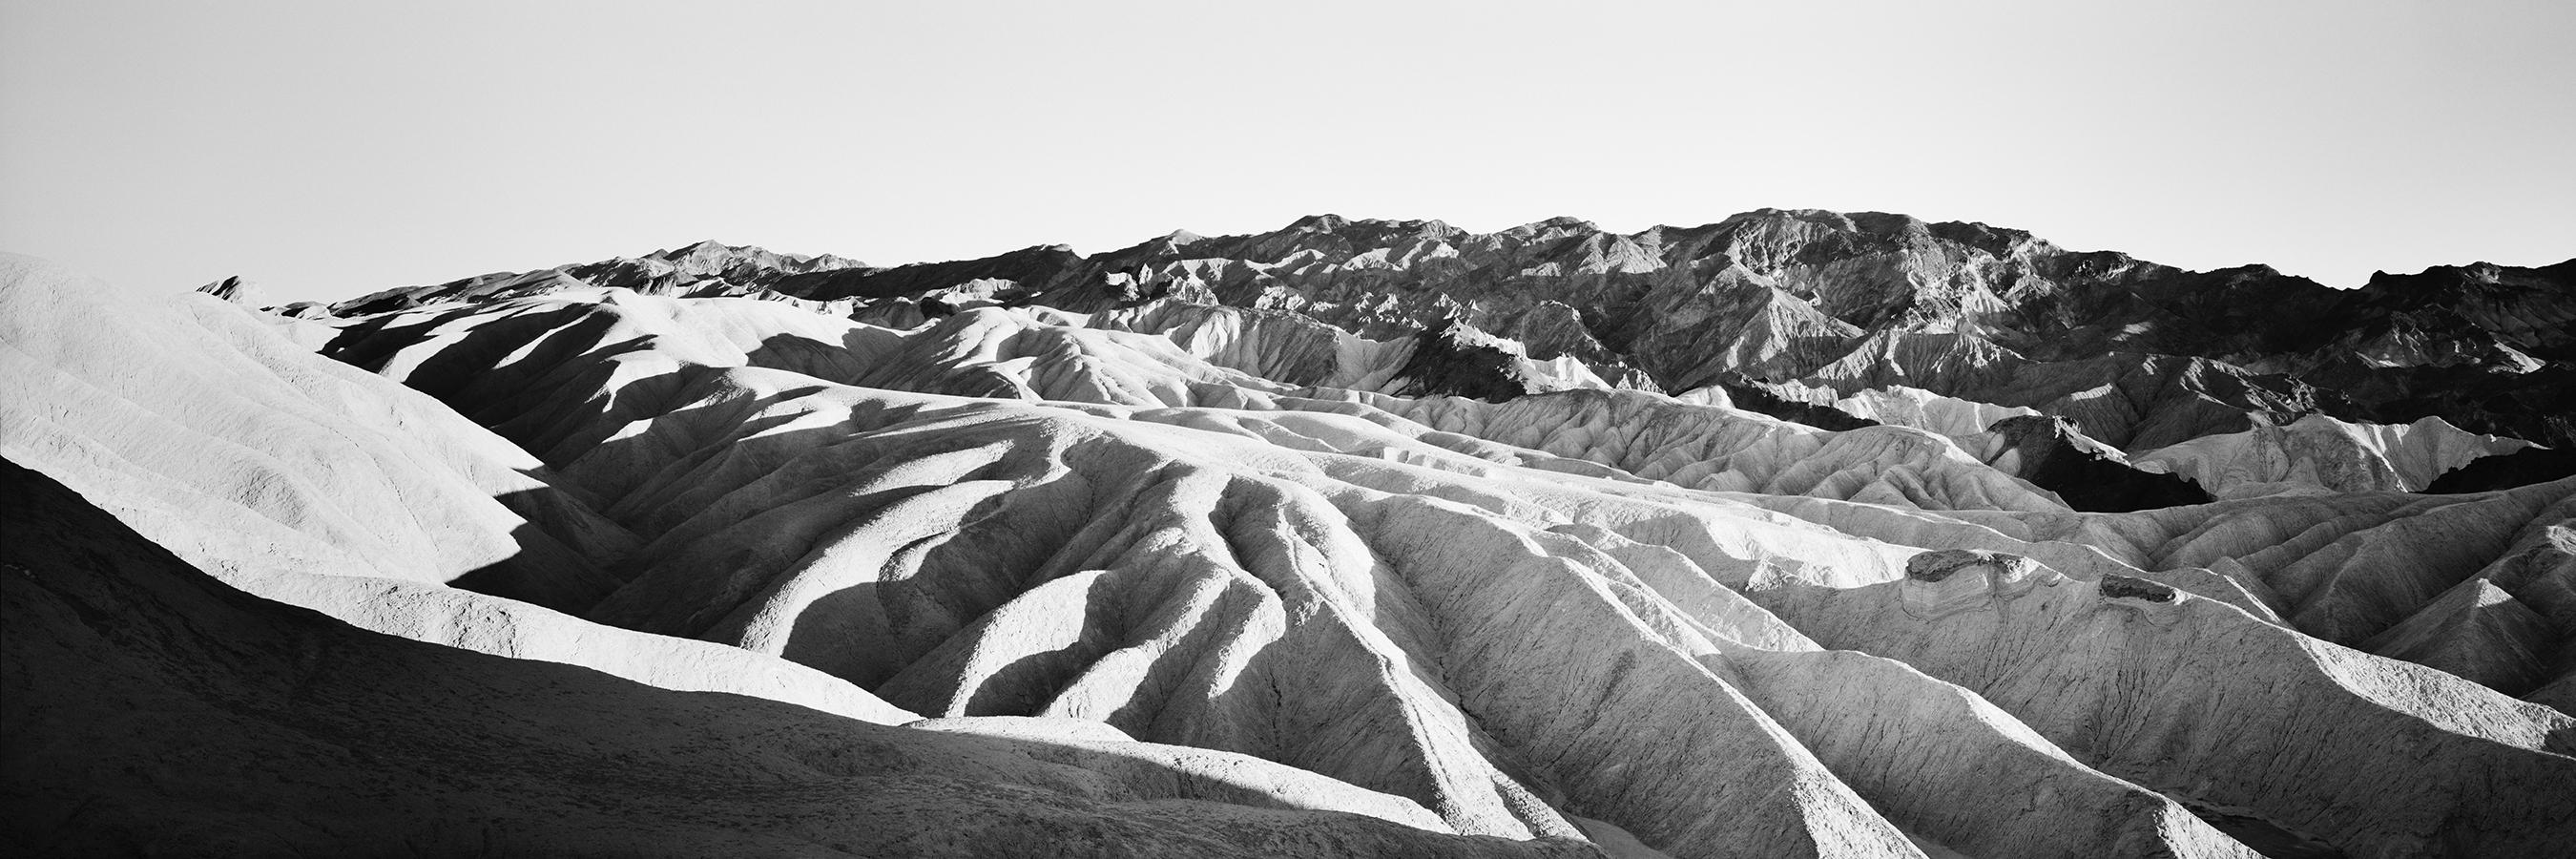 Gerald Berghammer Landscape Photograph - Shadow Mountains Panorama, Death Valley, black and white photography, landscape